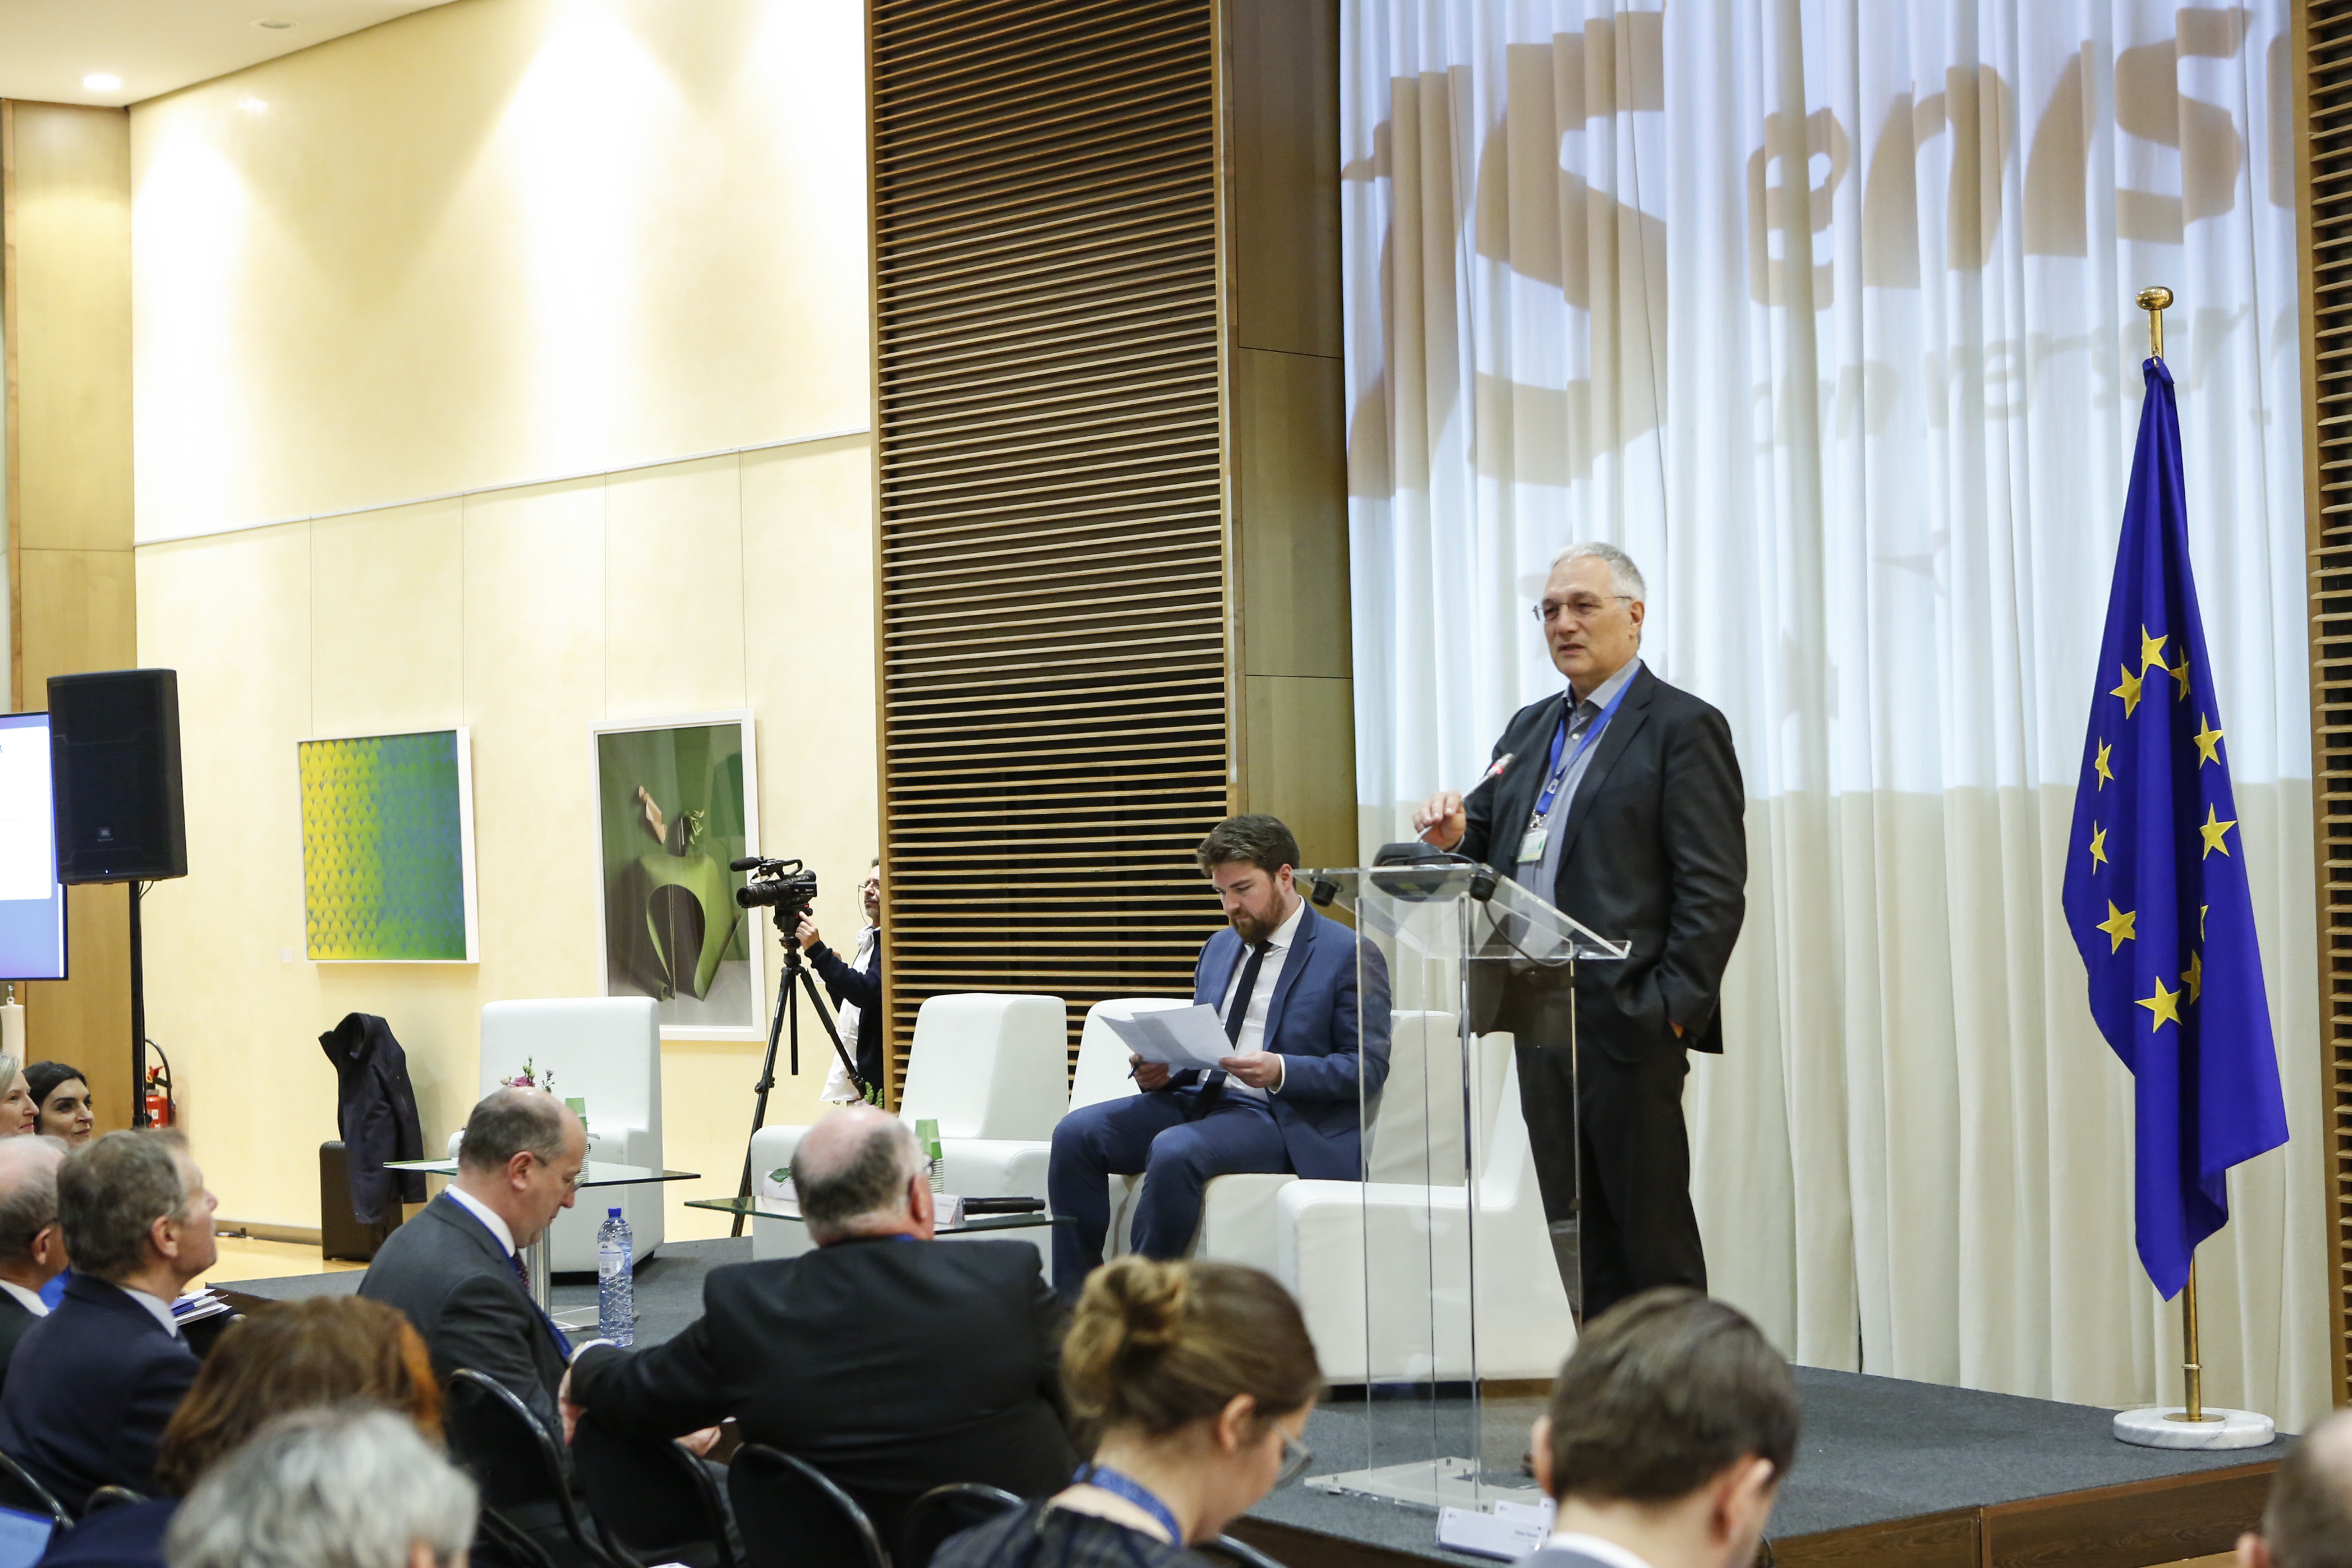 ENISA 15-year anniversary event - March 2019